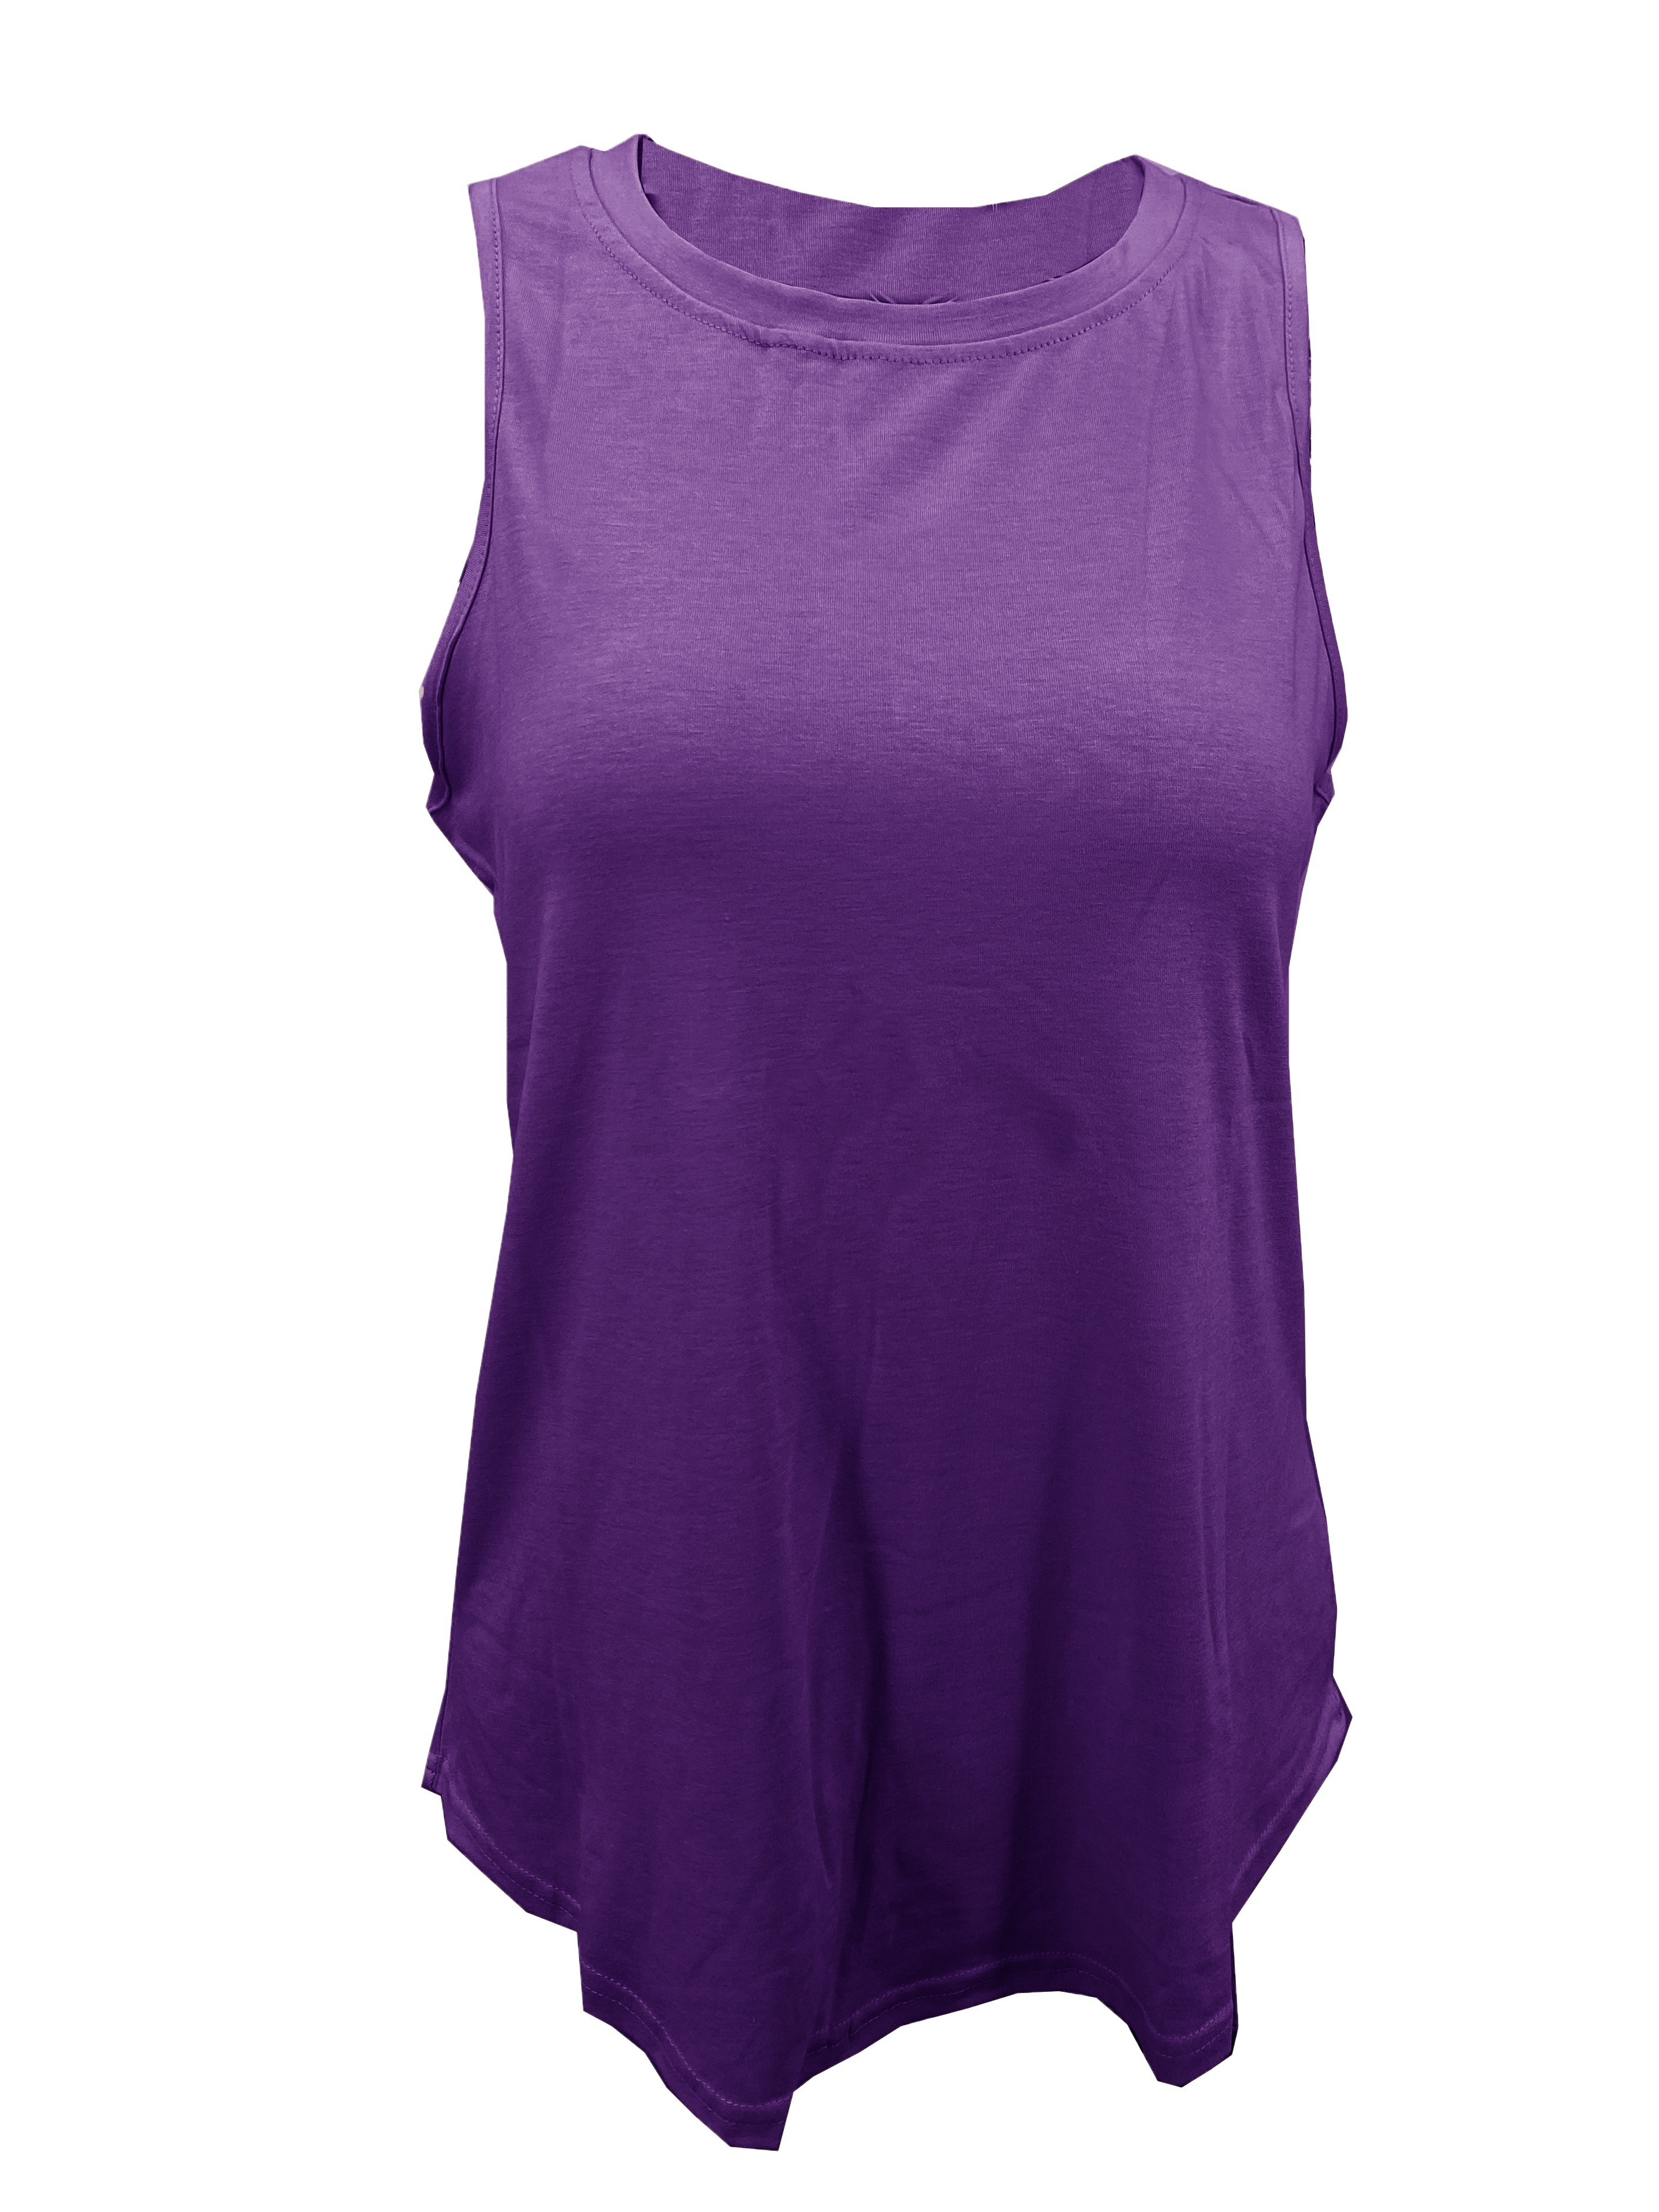 adviicd Tank Tops For Women Tops for Women Summer Chiffon Shirts Tie Bow  Knot Sleeveless Tank Tops Loose Fit Purple M 